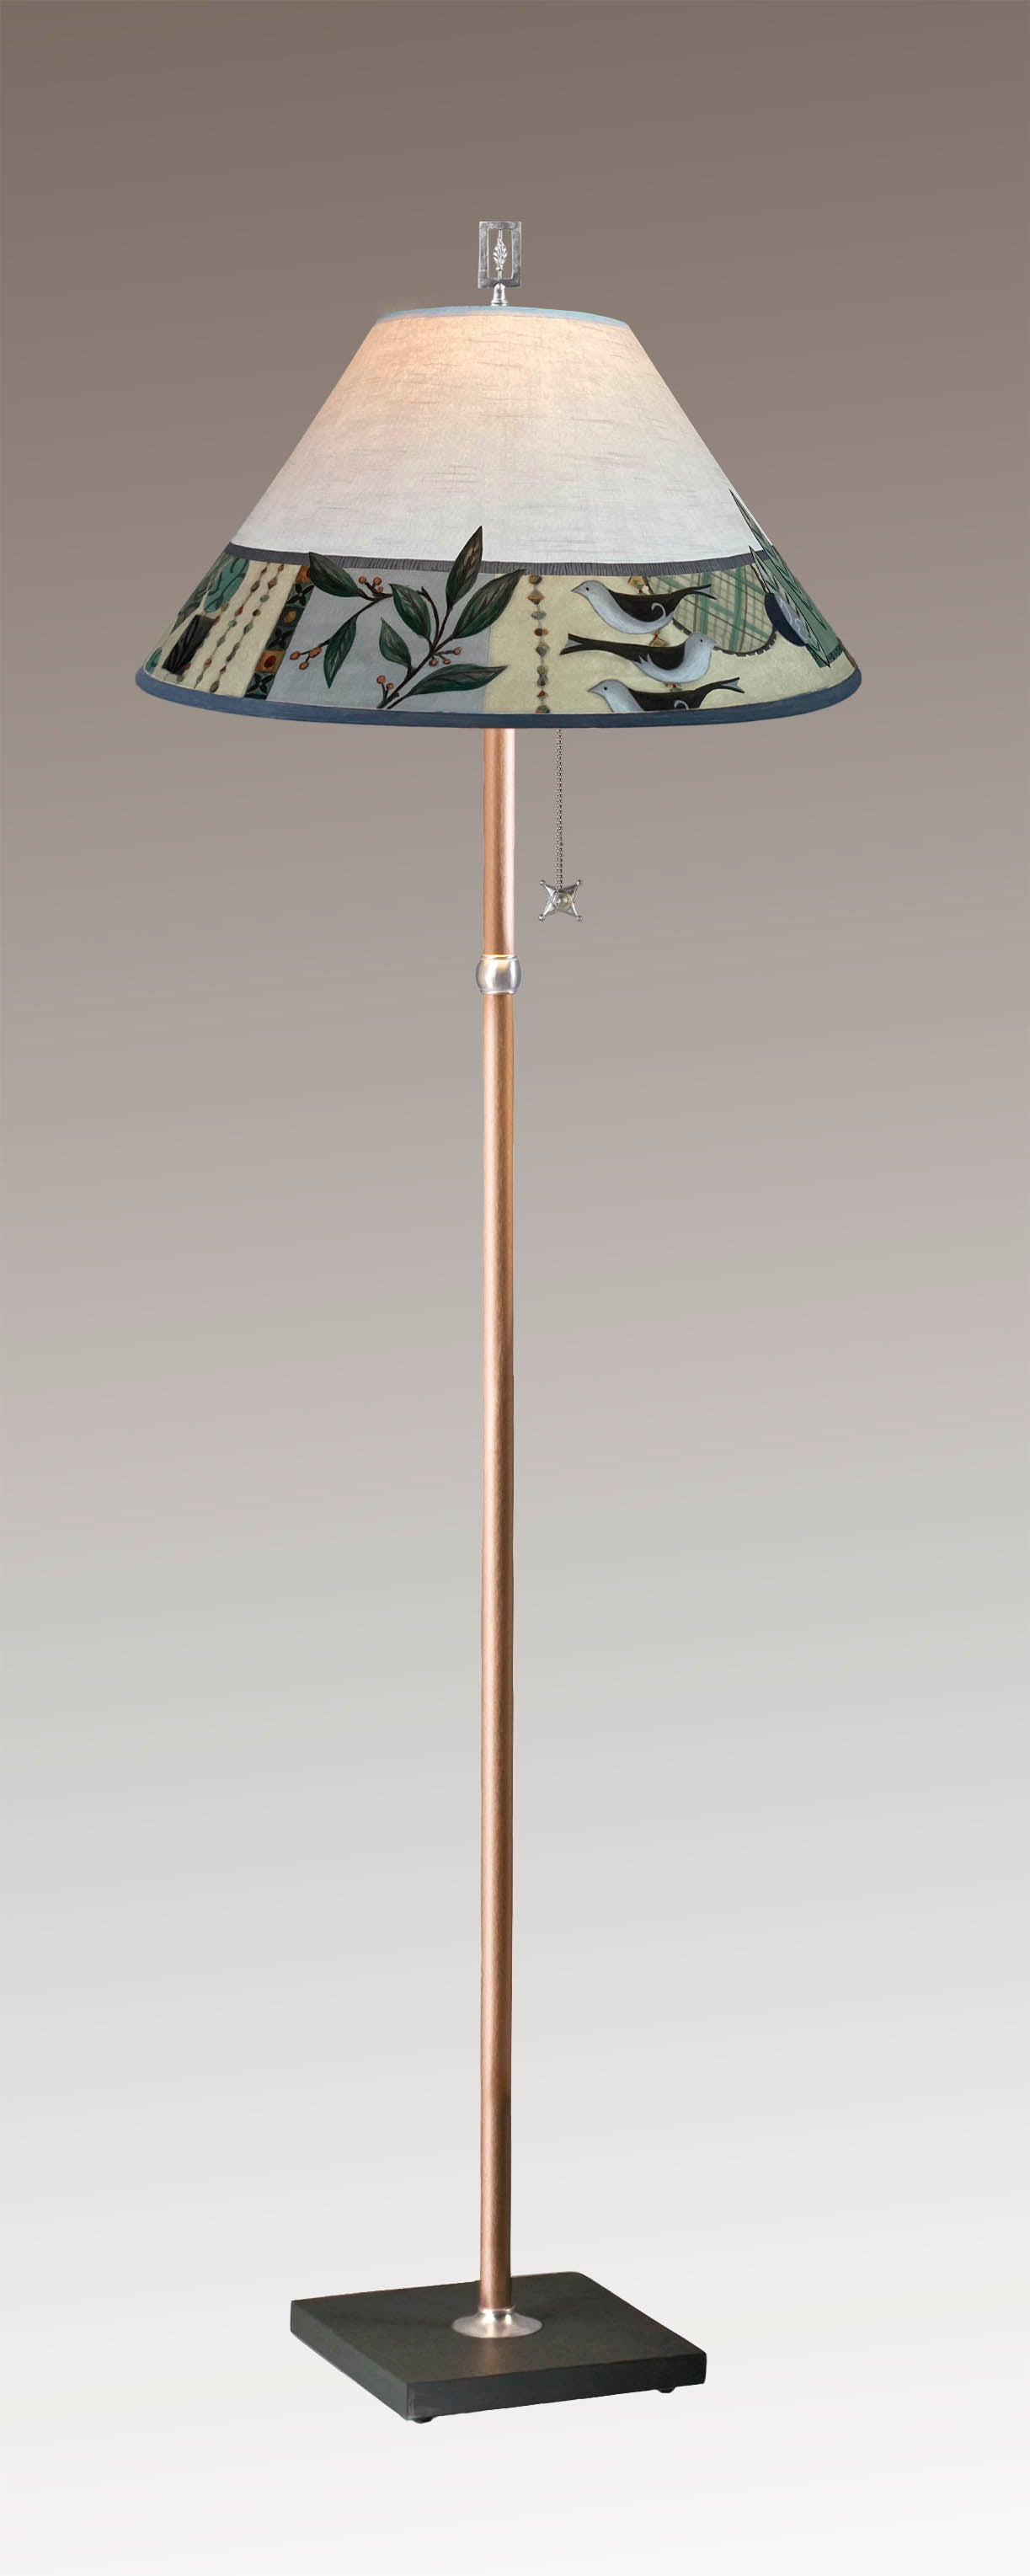 Janna Ugone & Co Floor Lamp Copper Floor Lamp with Large Conical Shade in New Capri Opal